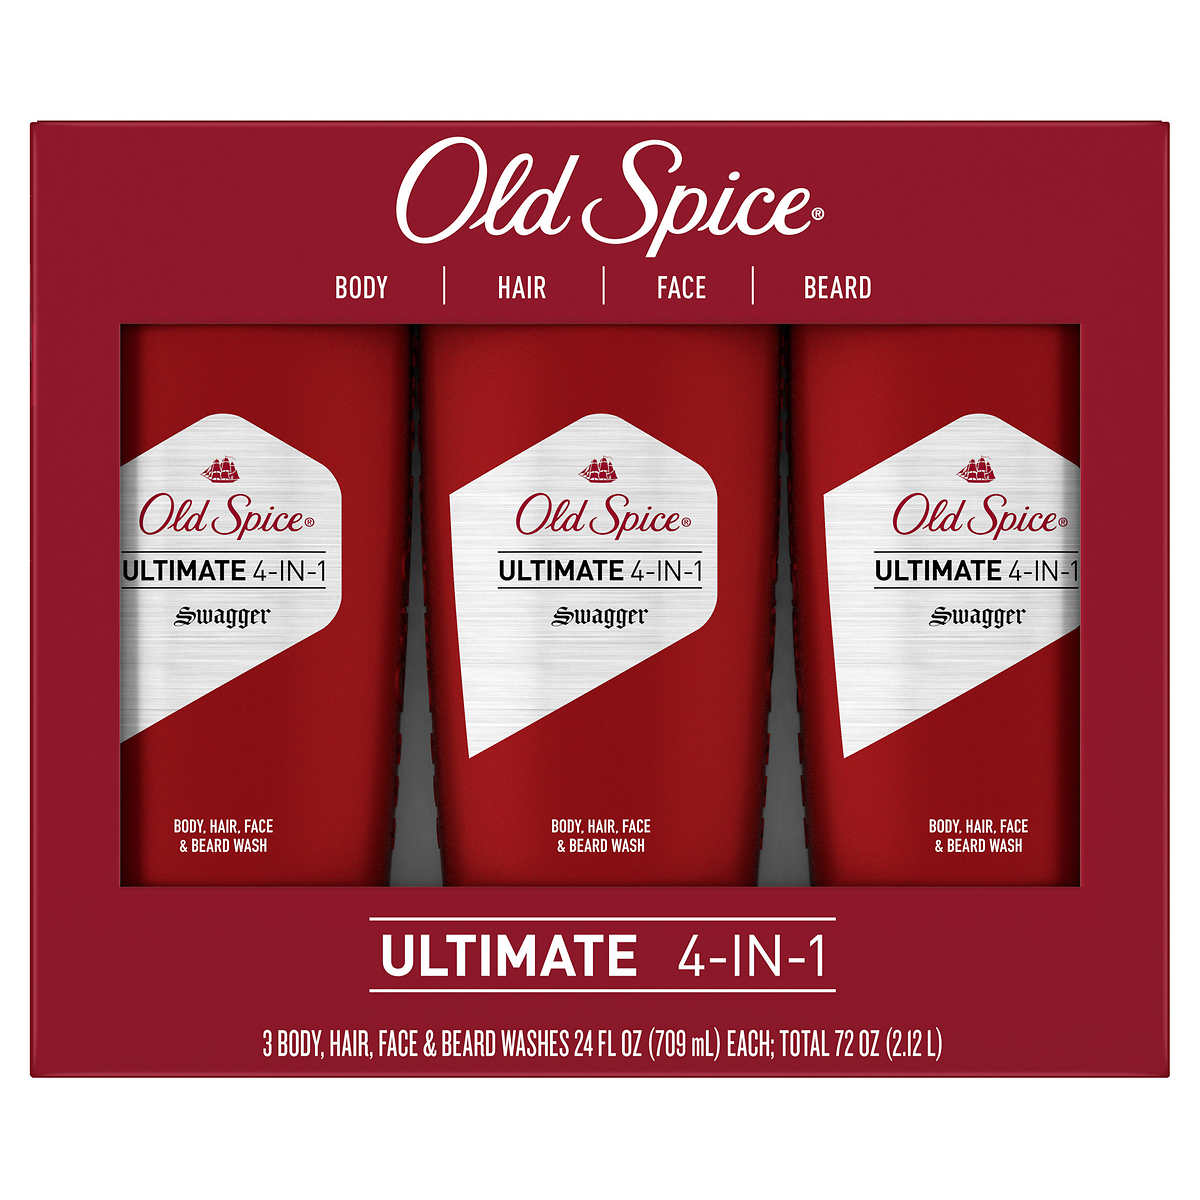 Old Spice Ultimate 4 In 1 Swagger 24 Fl Oz 3 Pack Costco